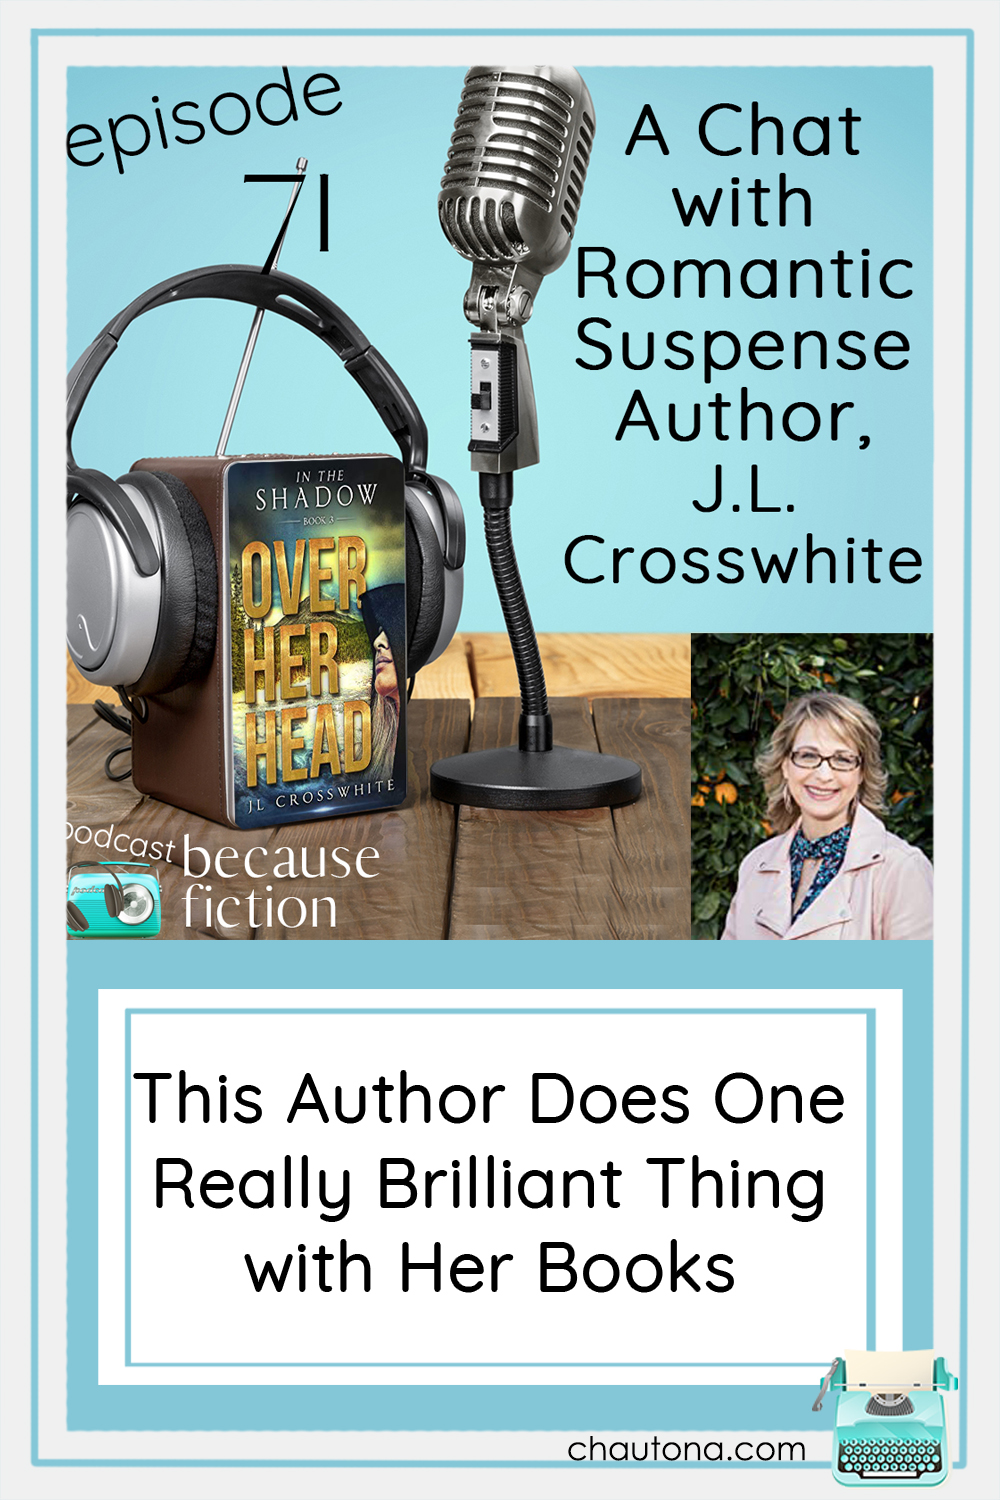 J.L. Crosswhite writes more than brilliant Christian romantic suspense, she also writes a killer synopsis. Find out about her latest book! via @chautonahavig